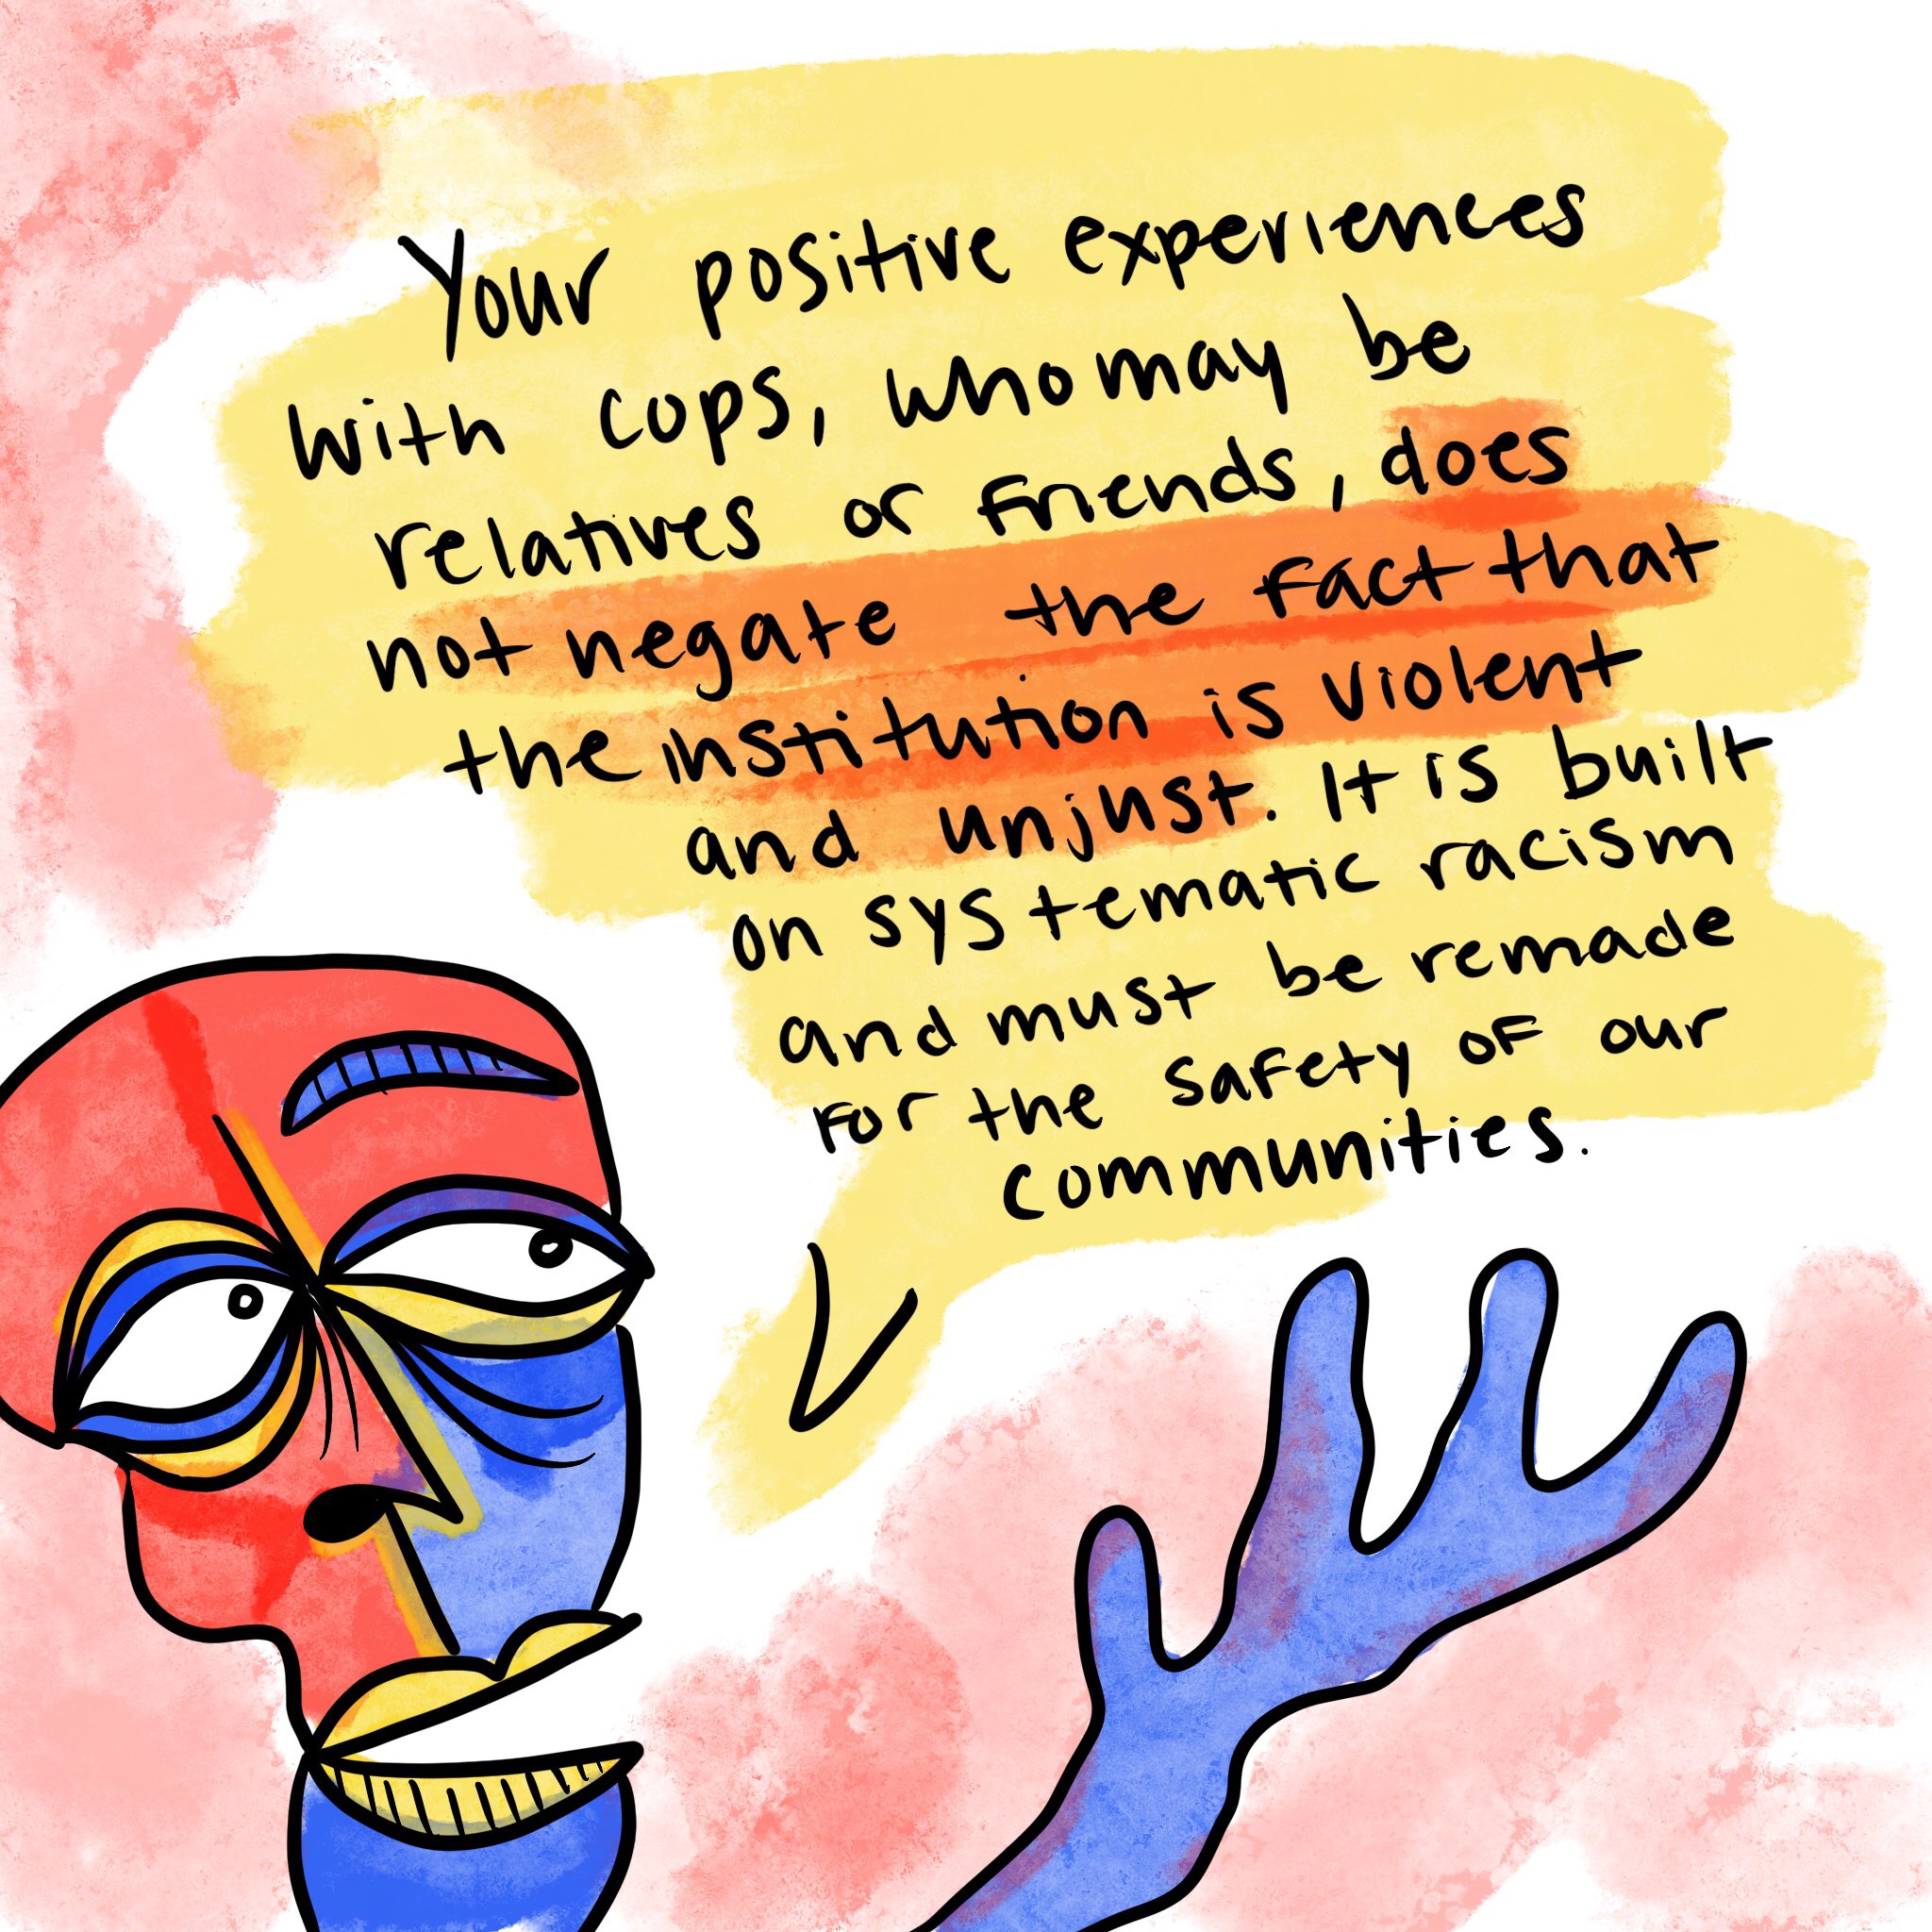 art by @furbyrose on twitter and @mrosearts on instagram. head1 saying 'Your positive experiences with cops, who may be relatives or friends, does not negate the fact that the institution is violent and unjust. It is built on systematic racism and must be remade for the safety of our communities'